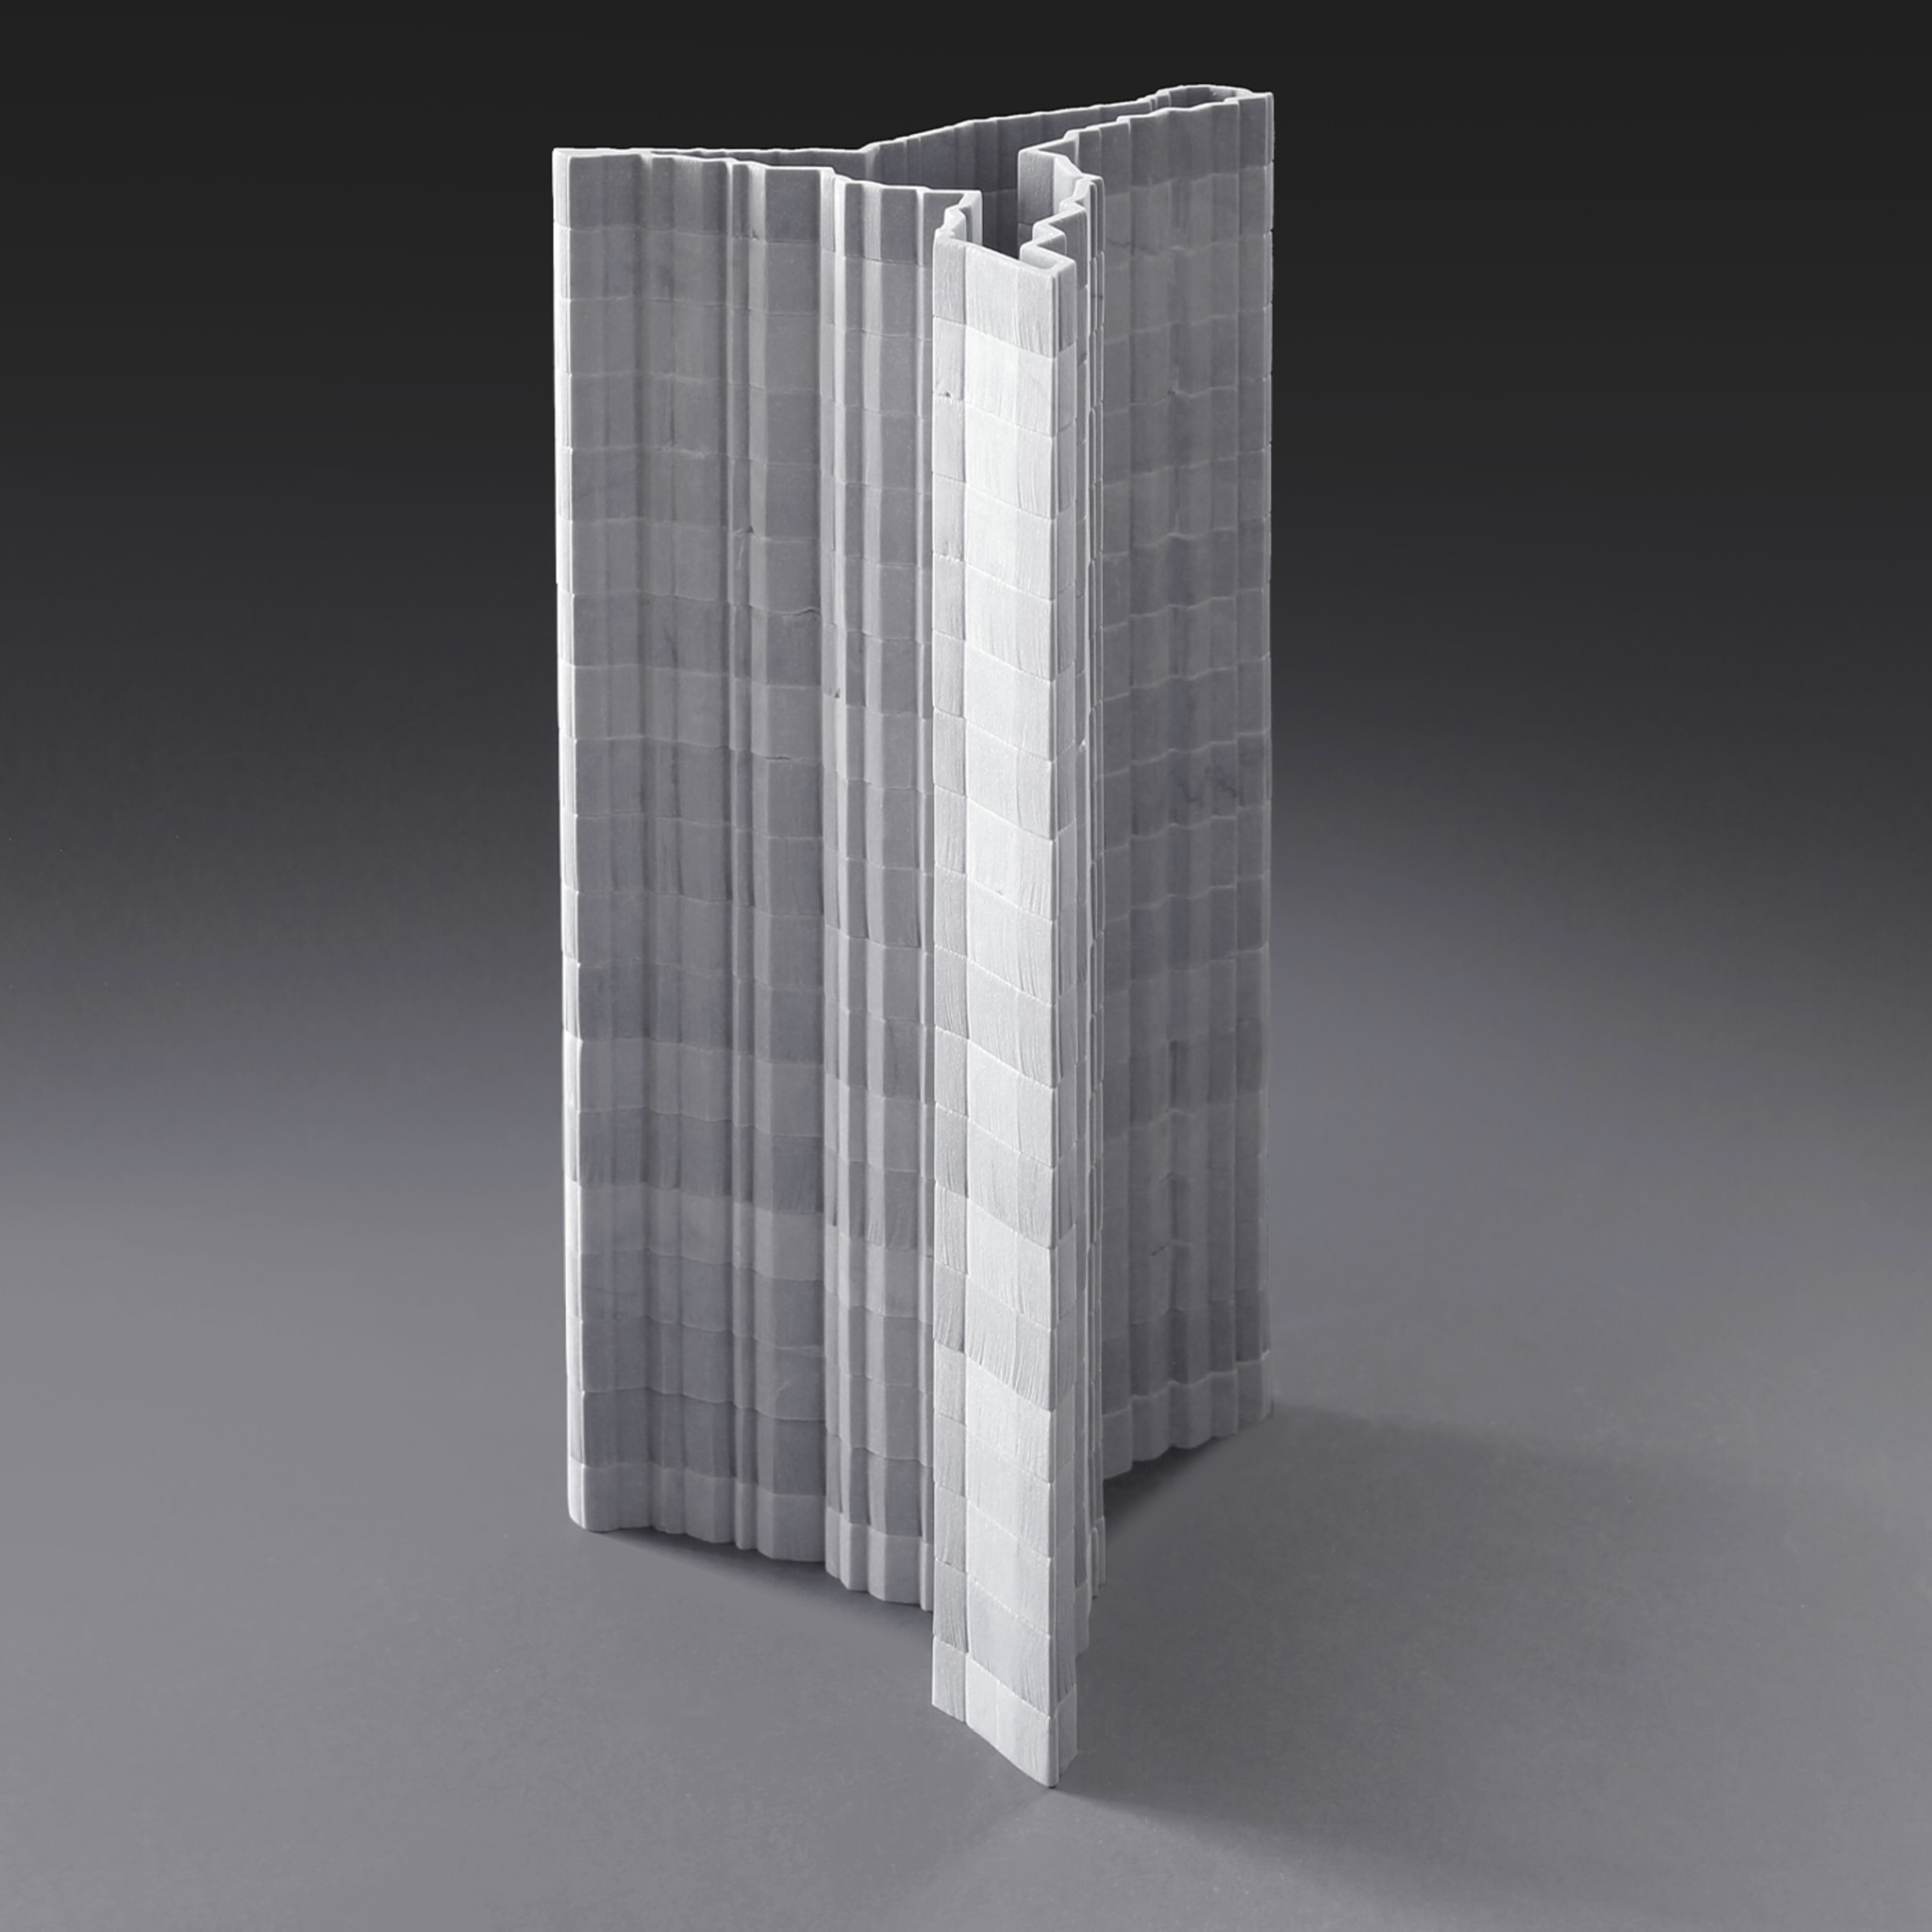 Stripes Vase Bardiglio Marble #1 by Paolo Ulian - Alternative view 3